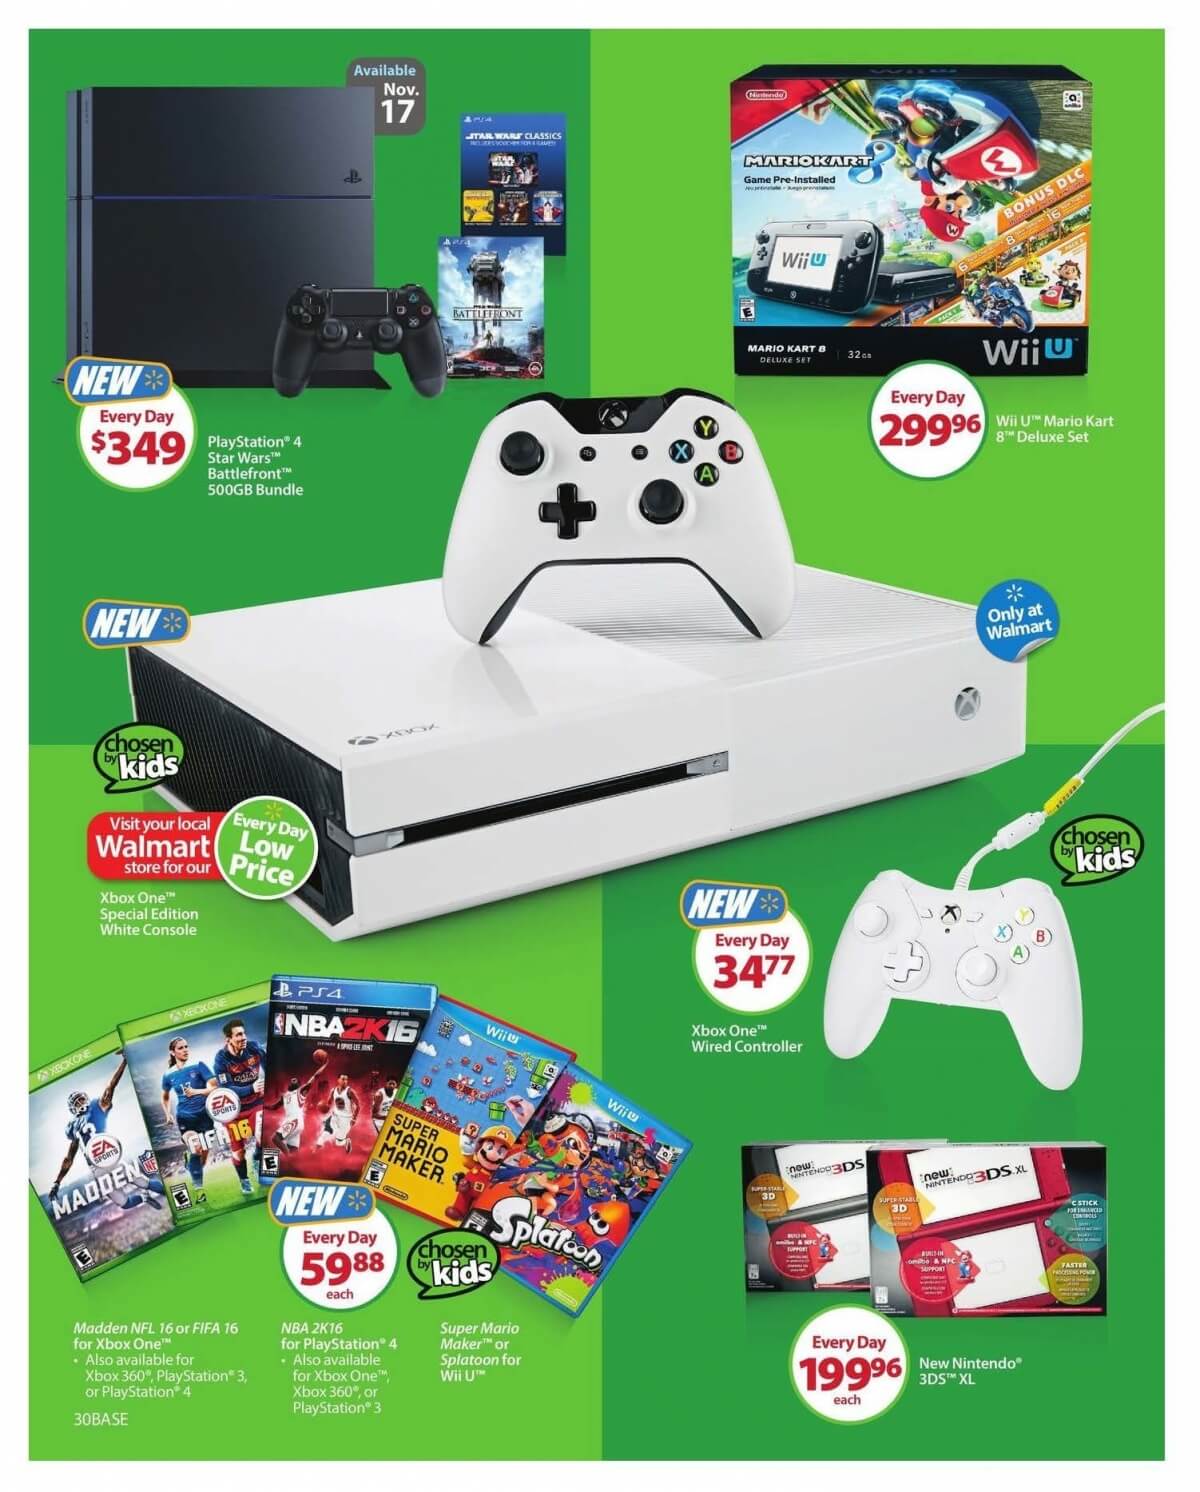 Black Friday 2015 Walmart, Target and Best Buy ad deals leaked